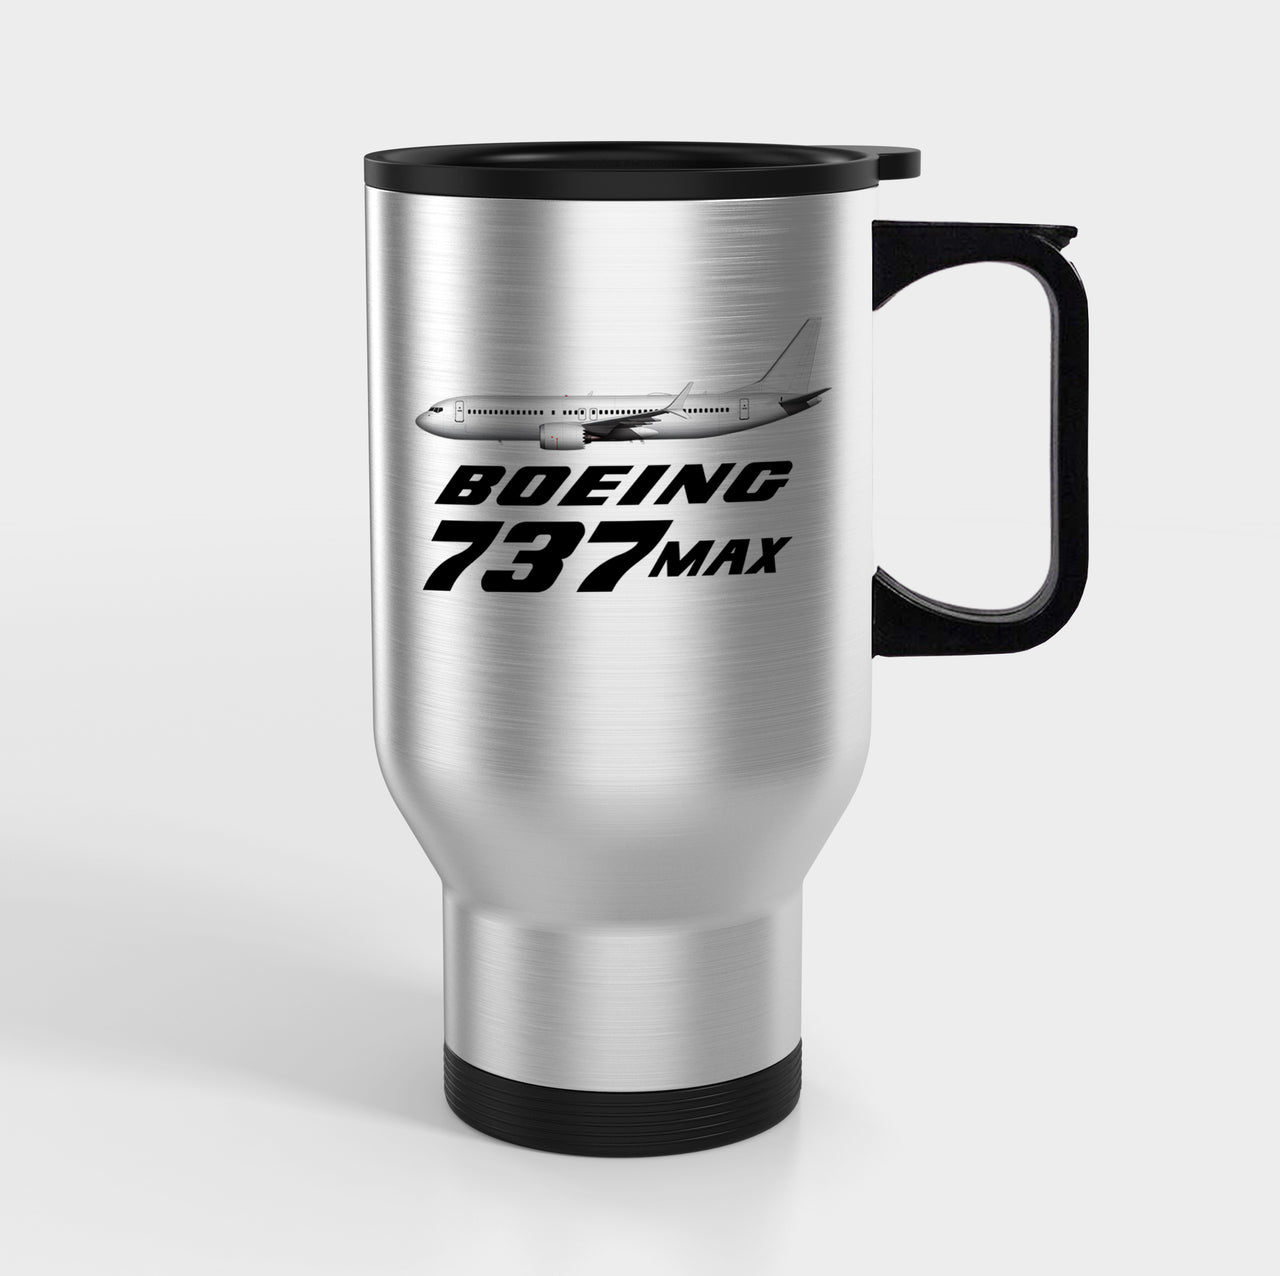 The Boeing 737 Max Designed Travel Mugs (With Holder)